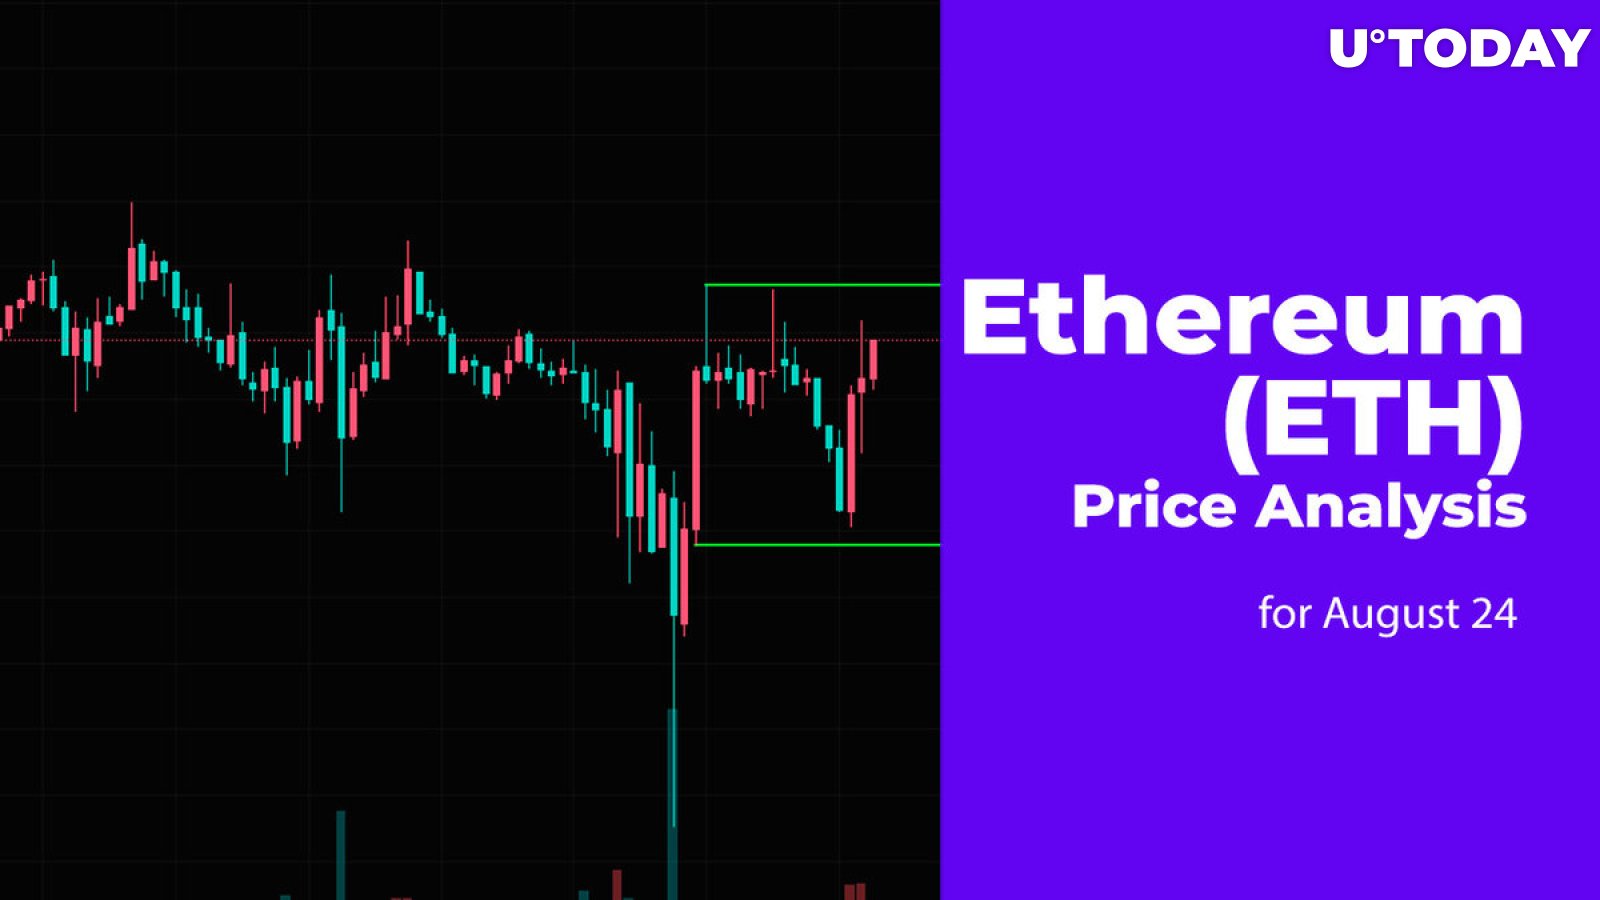 Ethereum (ETH) Price Analysis for August 24